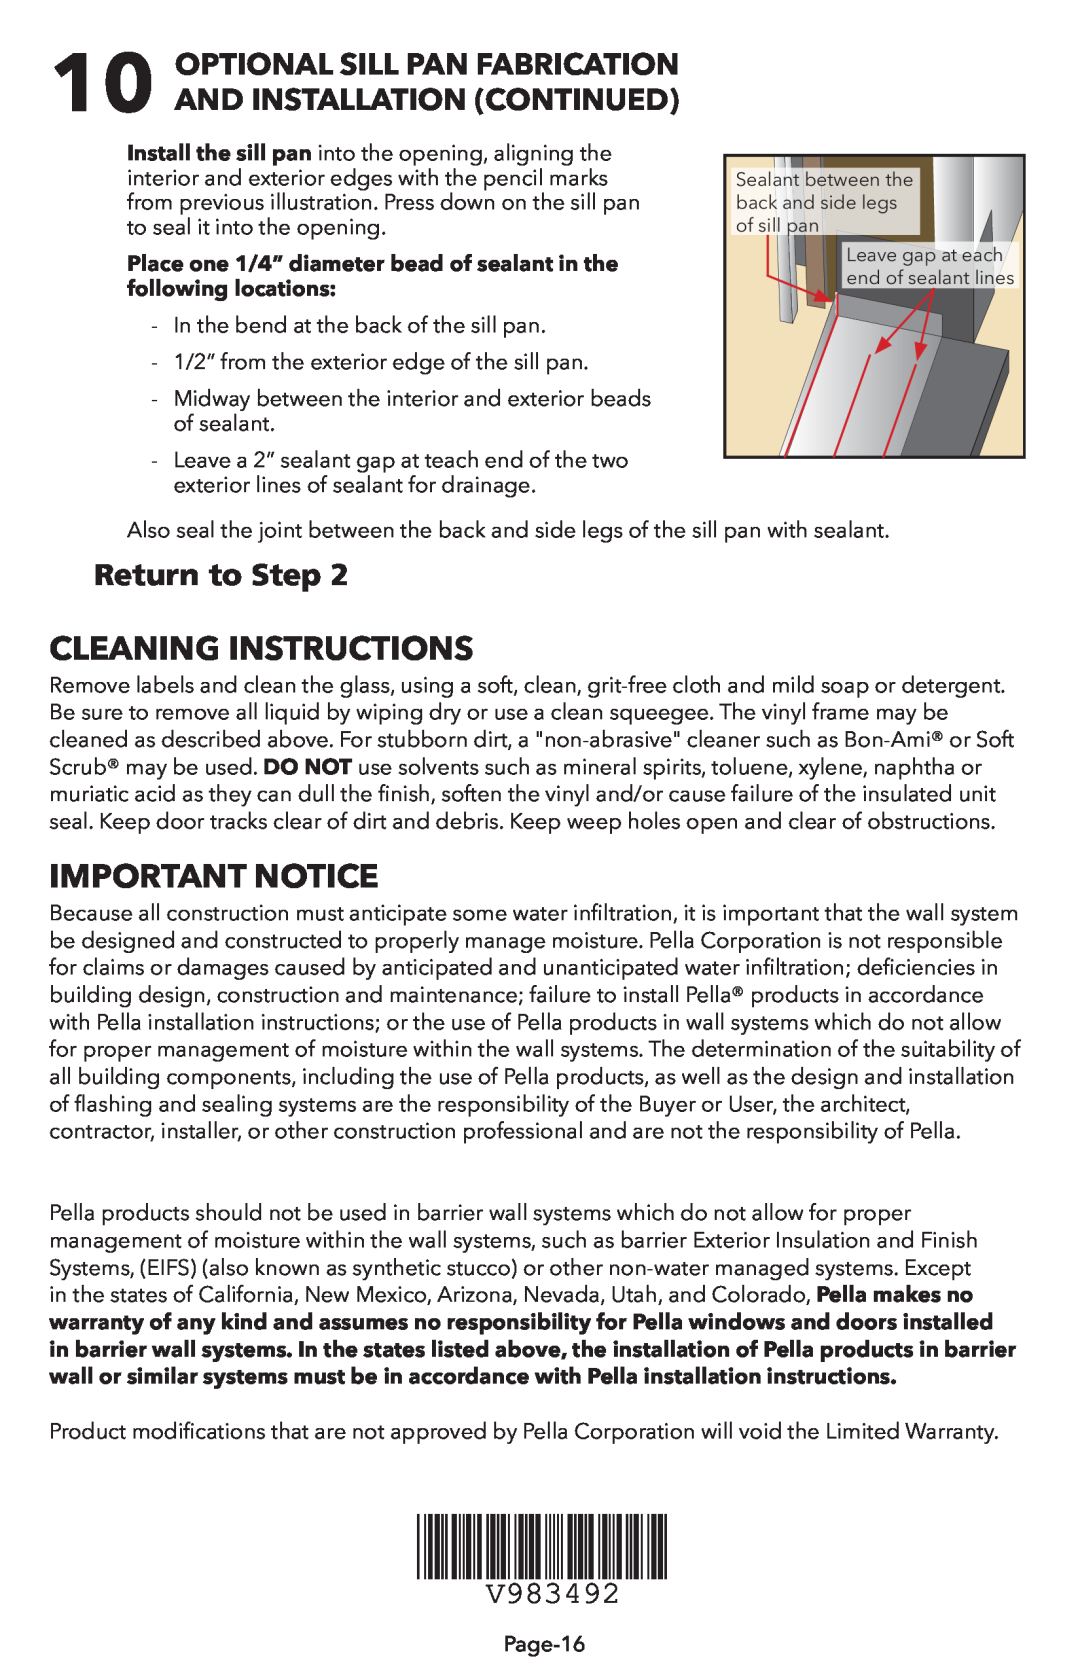 Pella V983492 CLEANINg INSTRUCTIONS, Important Notice, OPTIONAL SILL PAN fABRICATION, And Installation Continued 